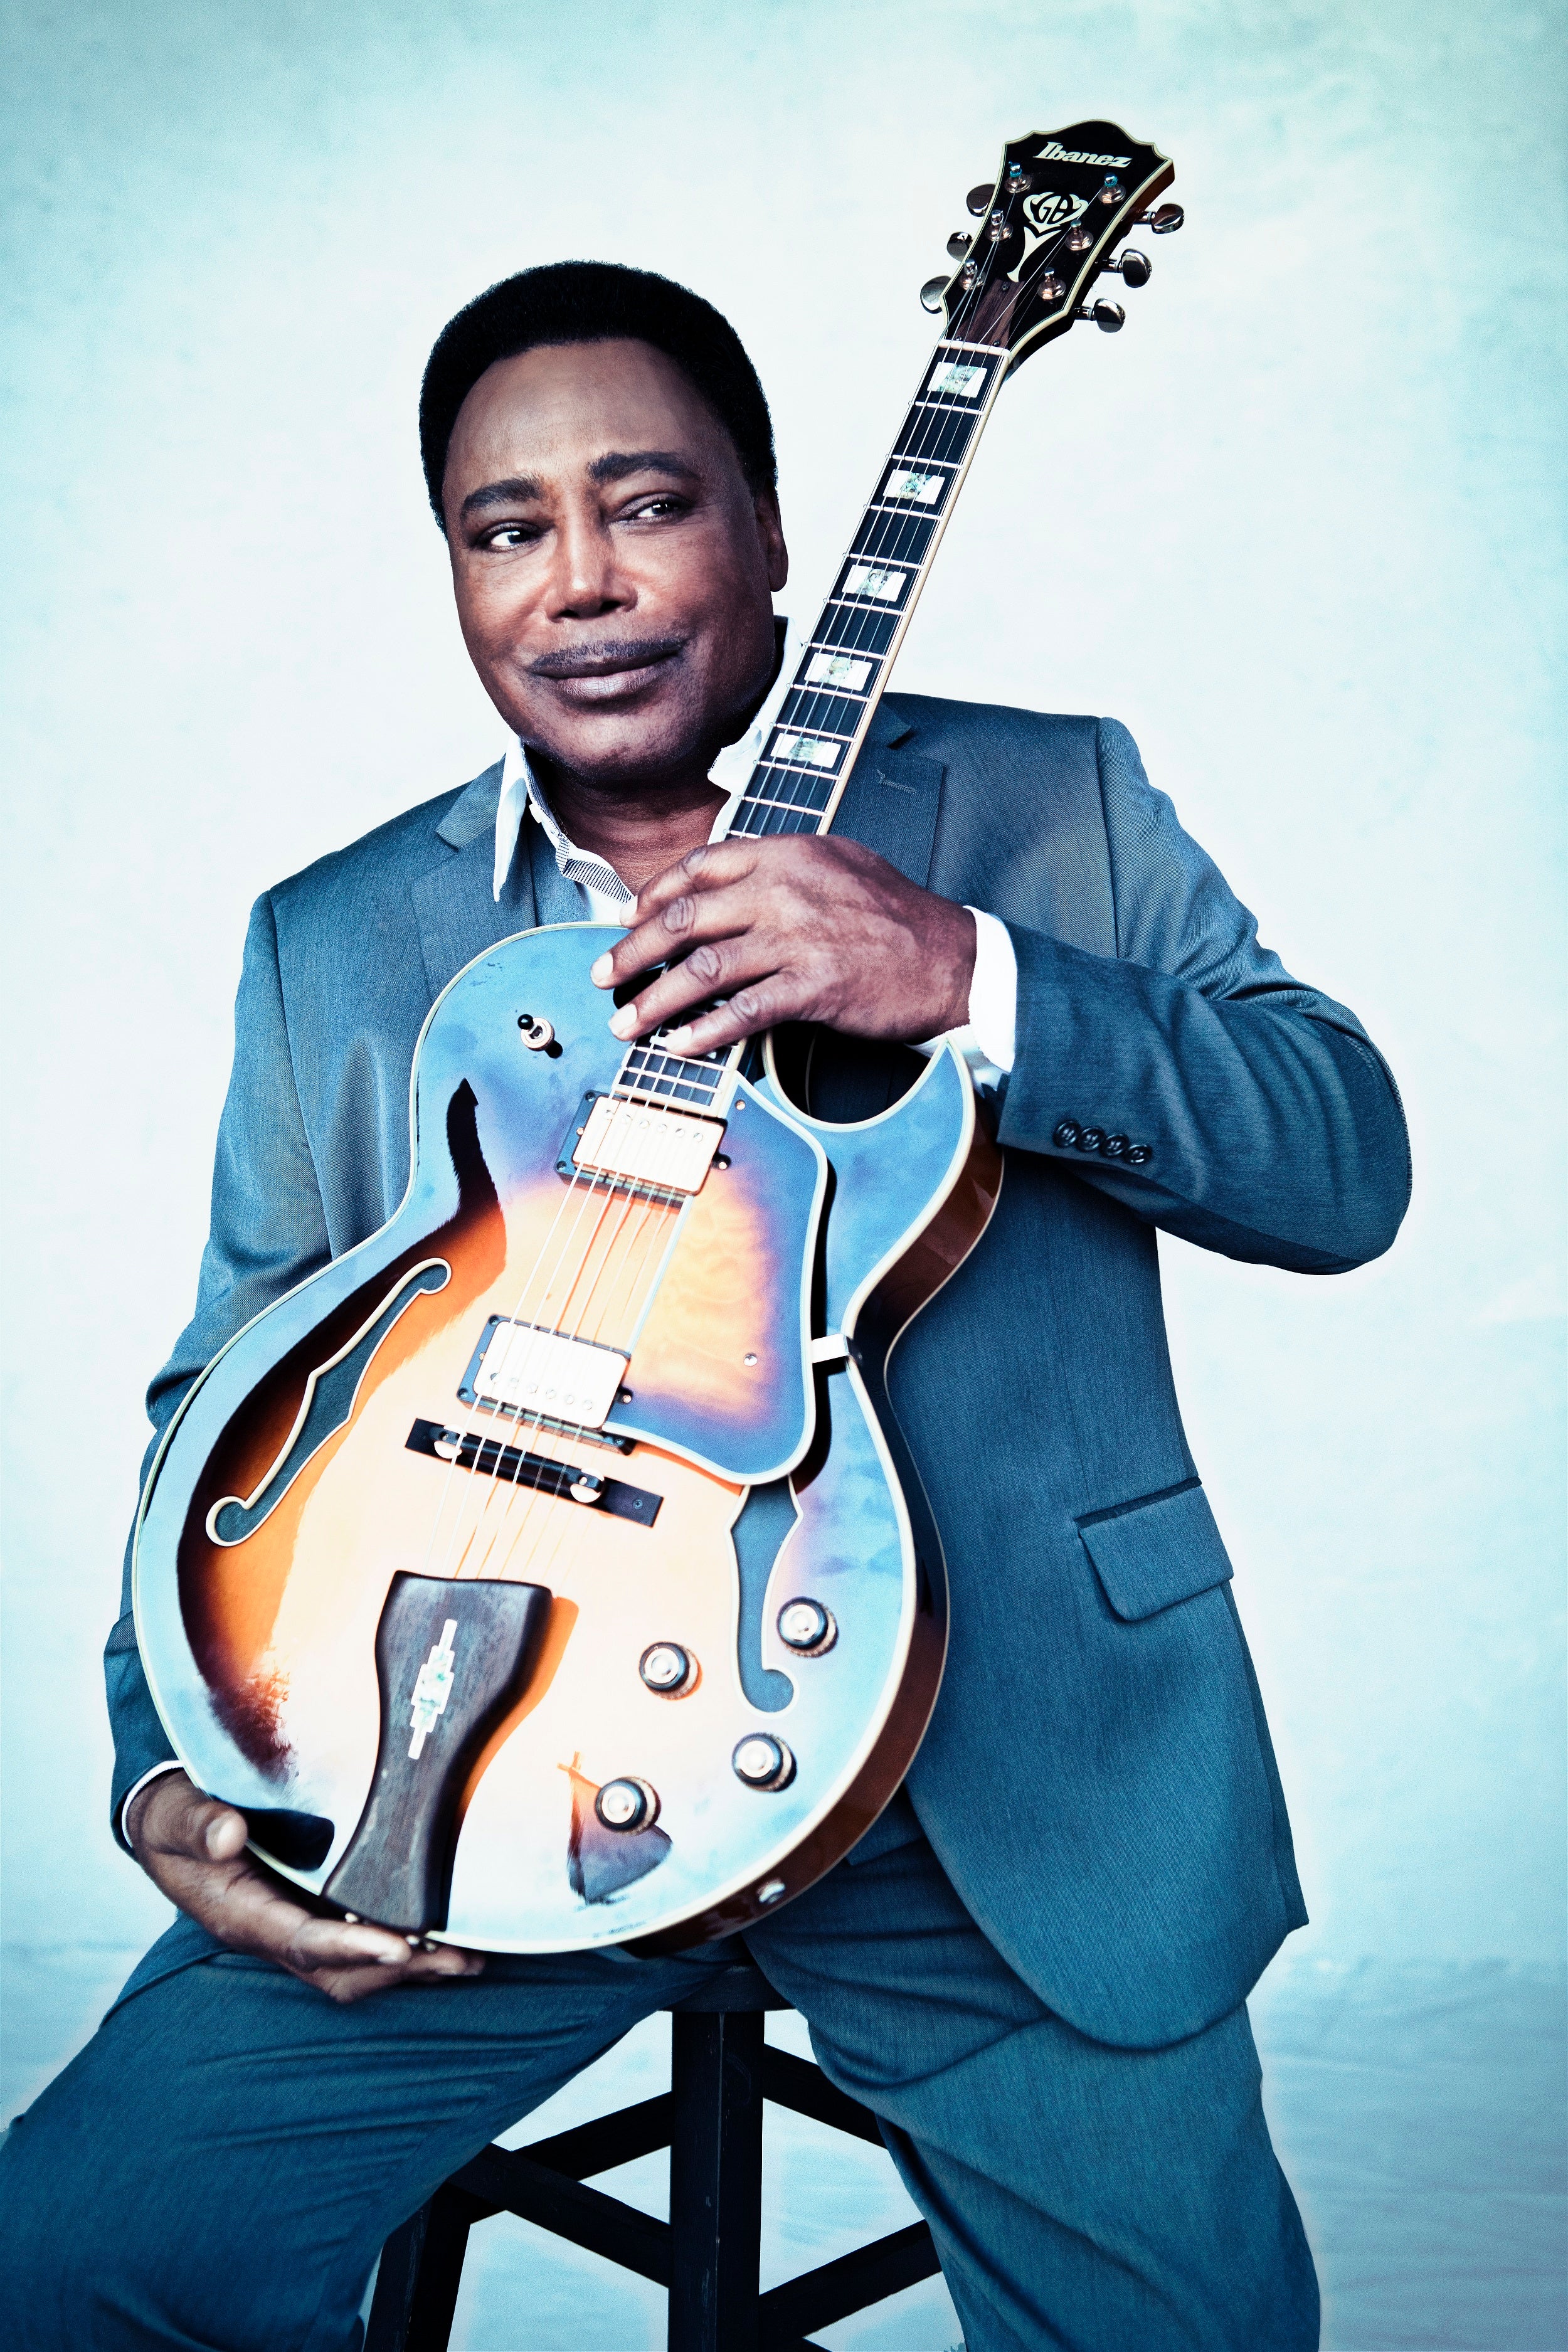 George Benson in Glasgow promo photo for Ticketmaster presale offer code